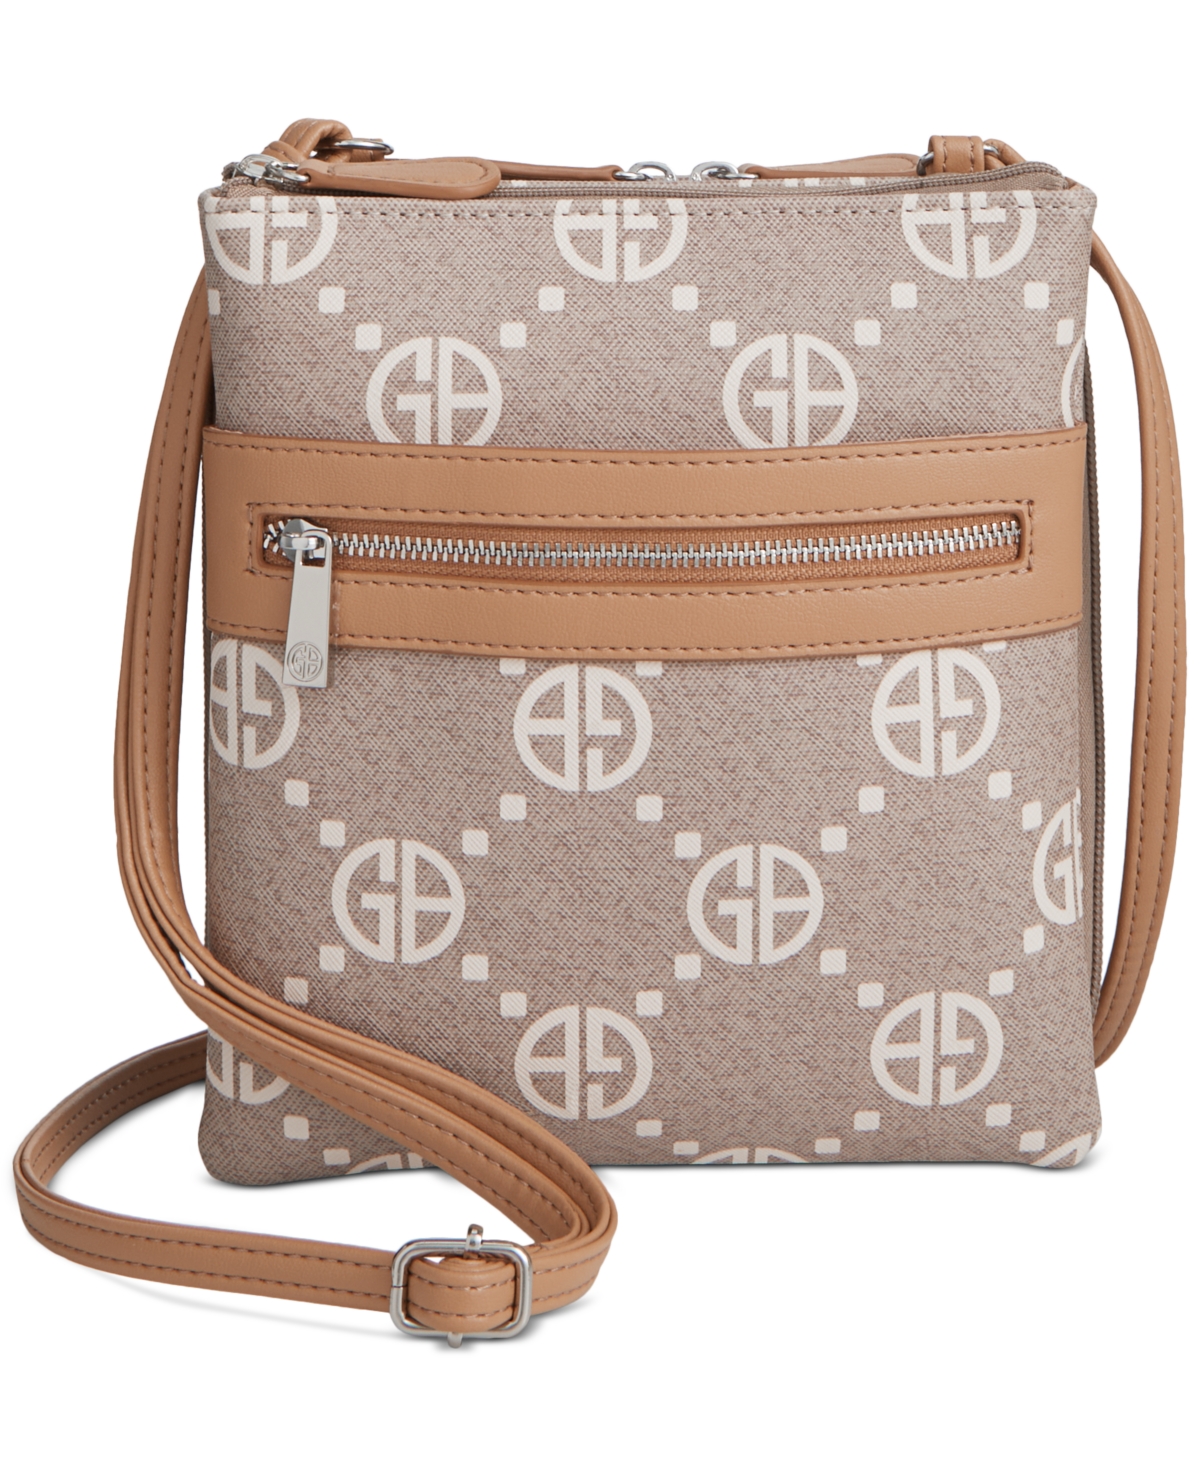 Signature Floral Triple-Zip Dasher Crossbody, Created for Macy's - Navy/white